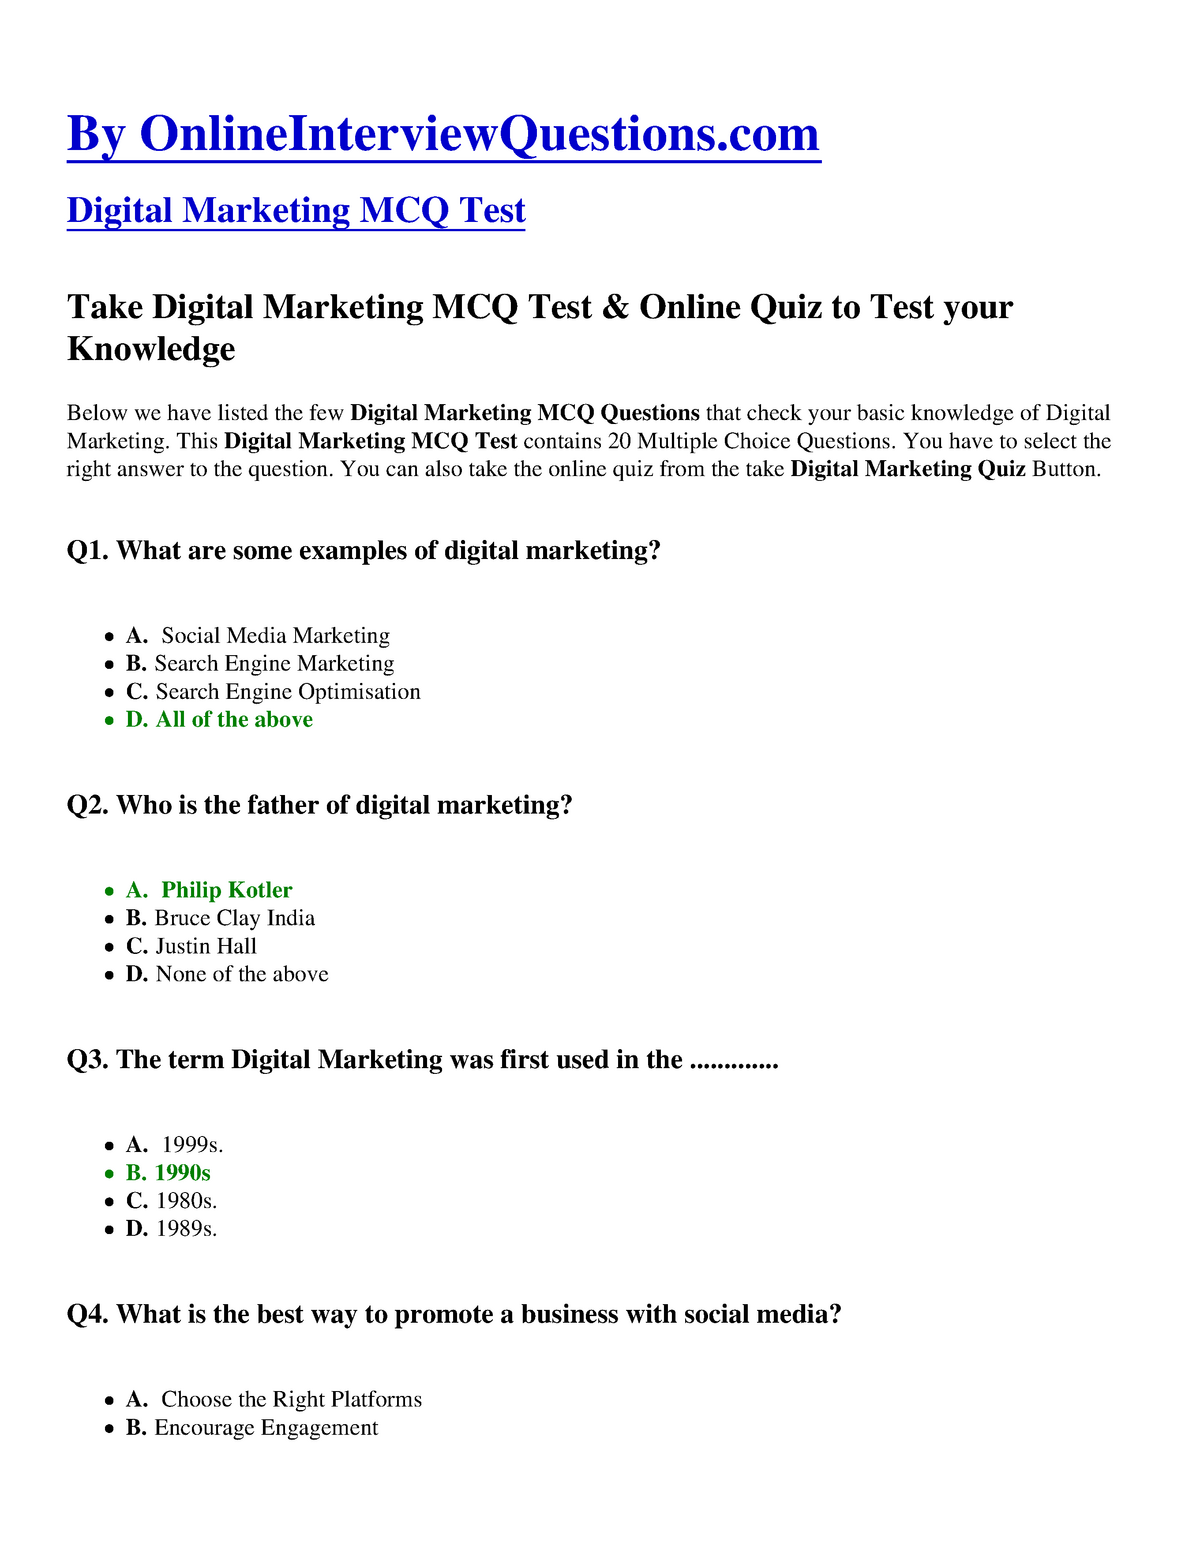 marketing essay questions and answers pdf